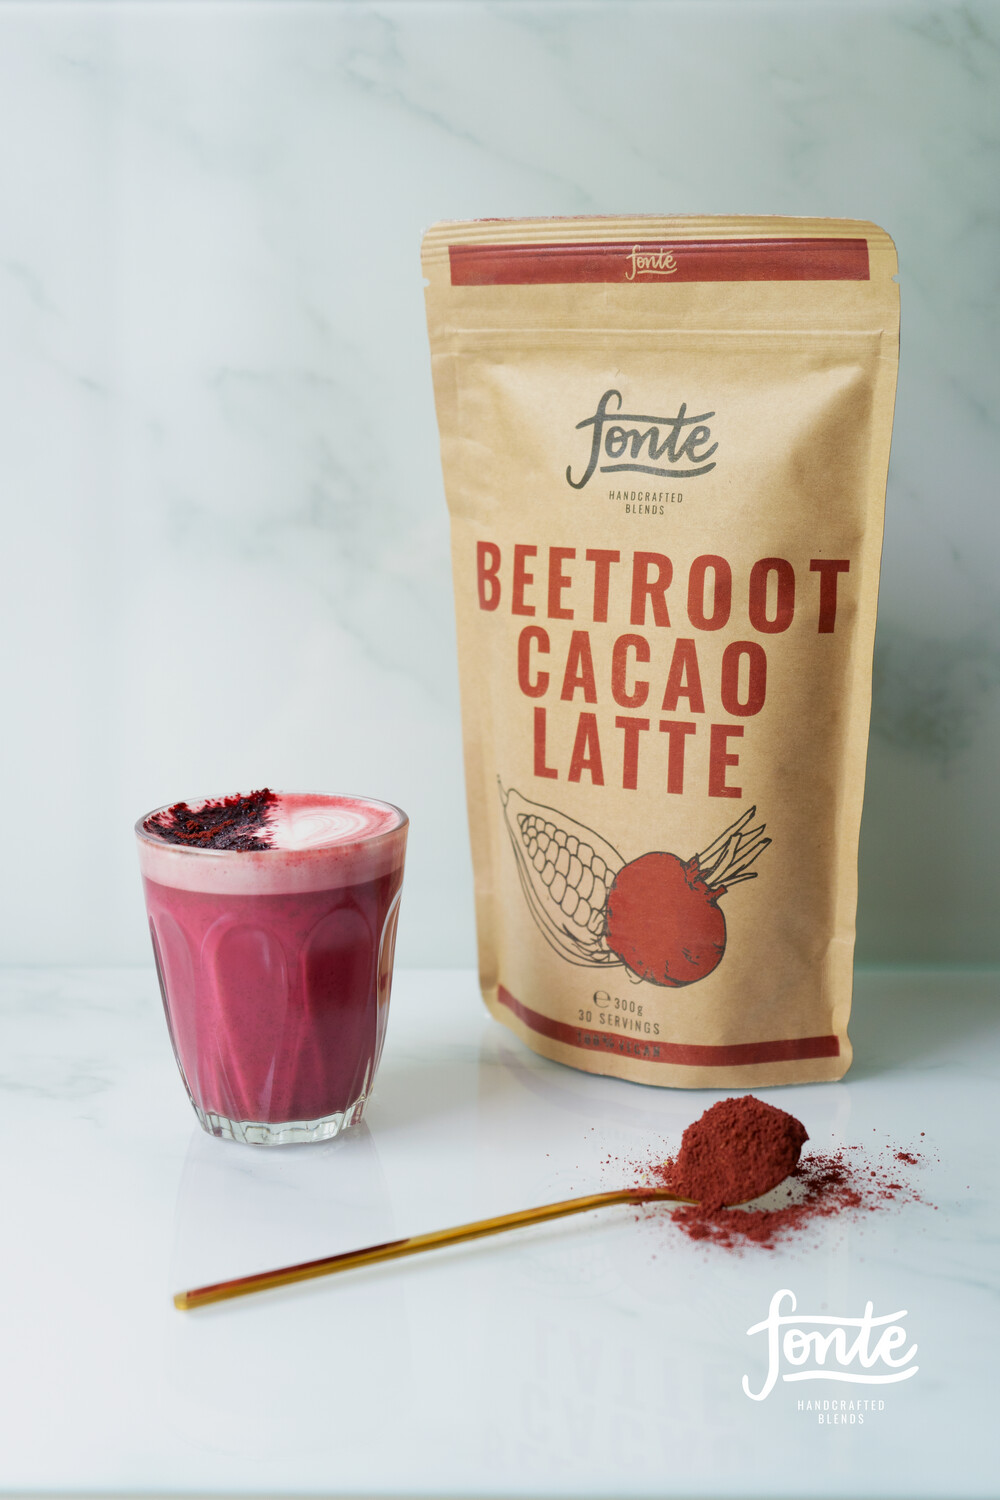 FONTE BEETROOT CACAO LATTES